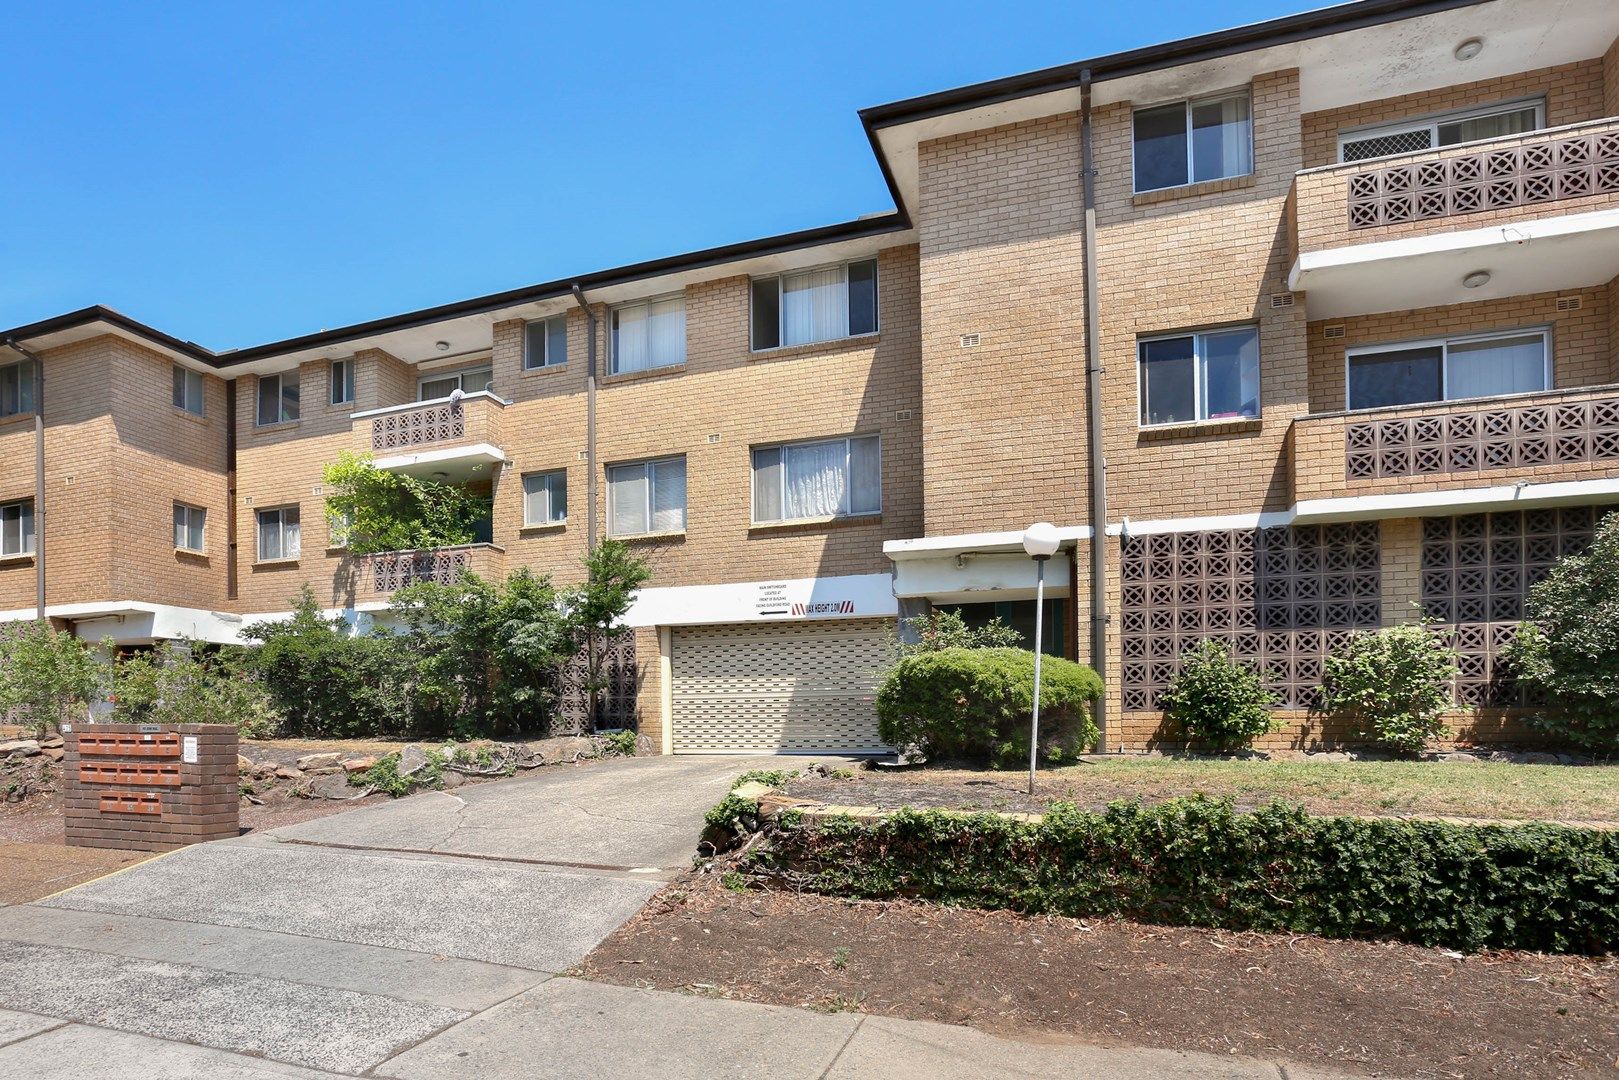 8/425 Guildford Rd, Guildford NSW 2161, Image 0